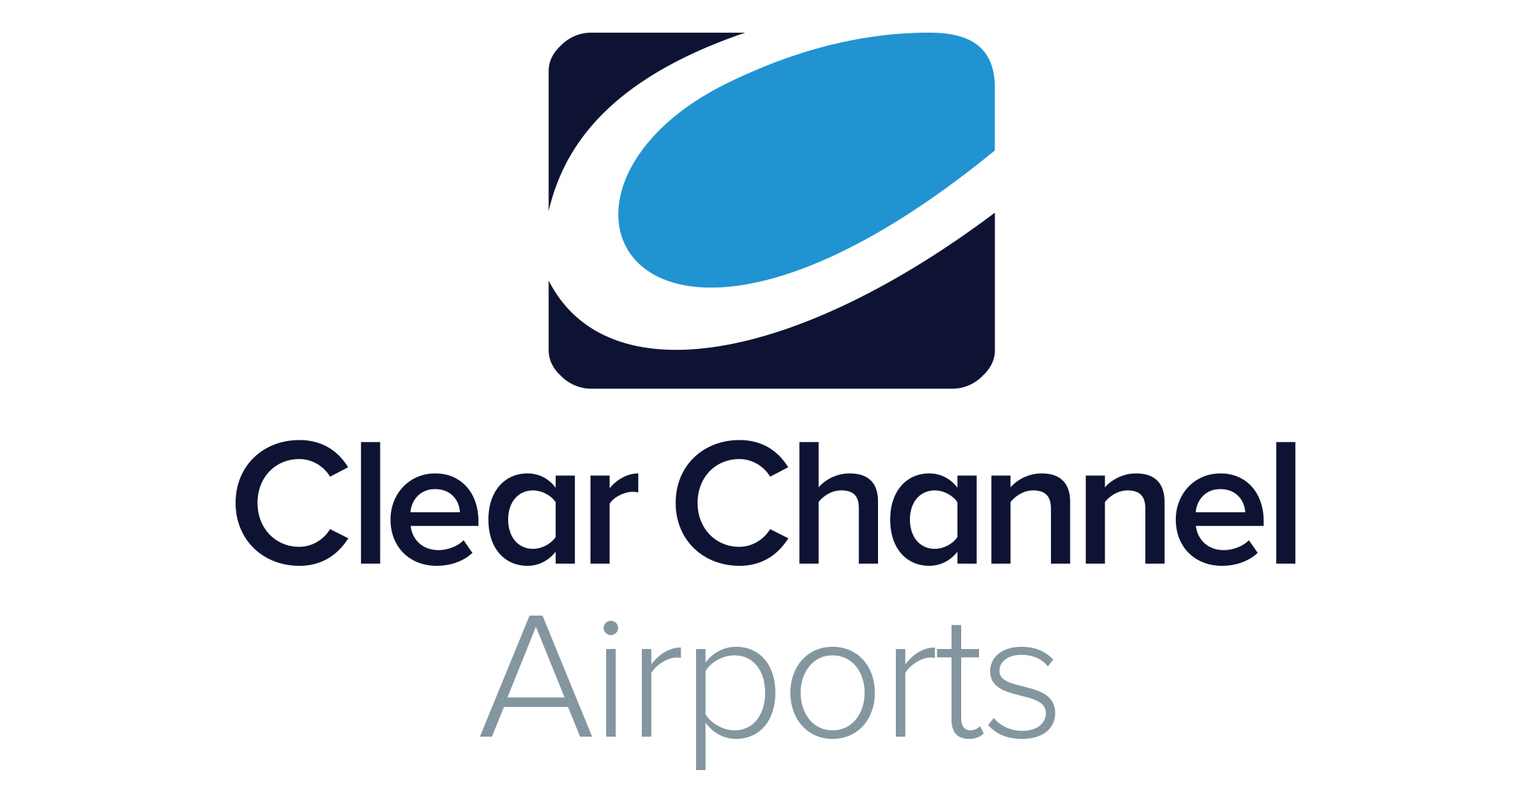 Clear Channel Airports jpg?p=facebook.